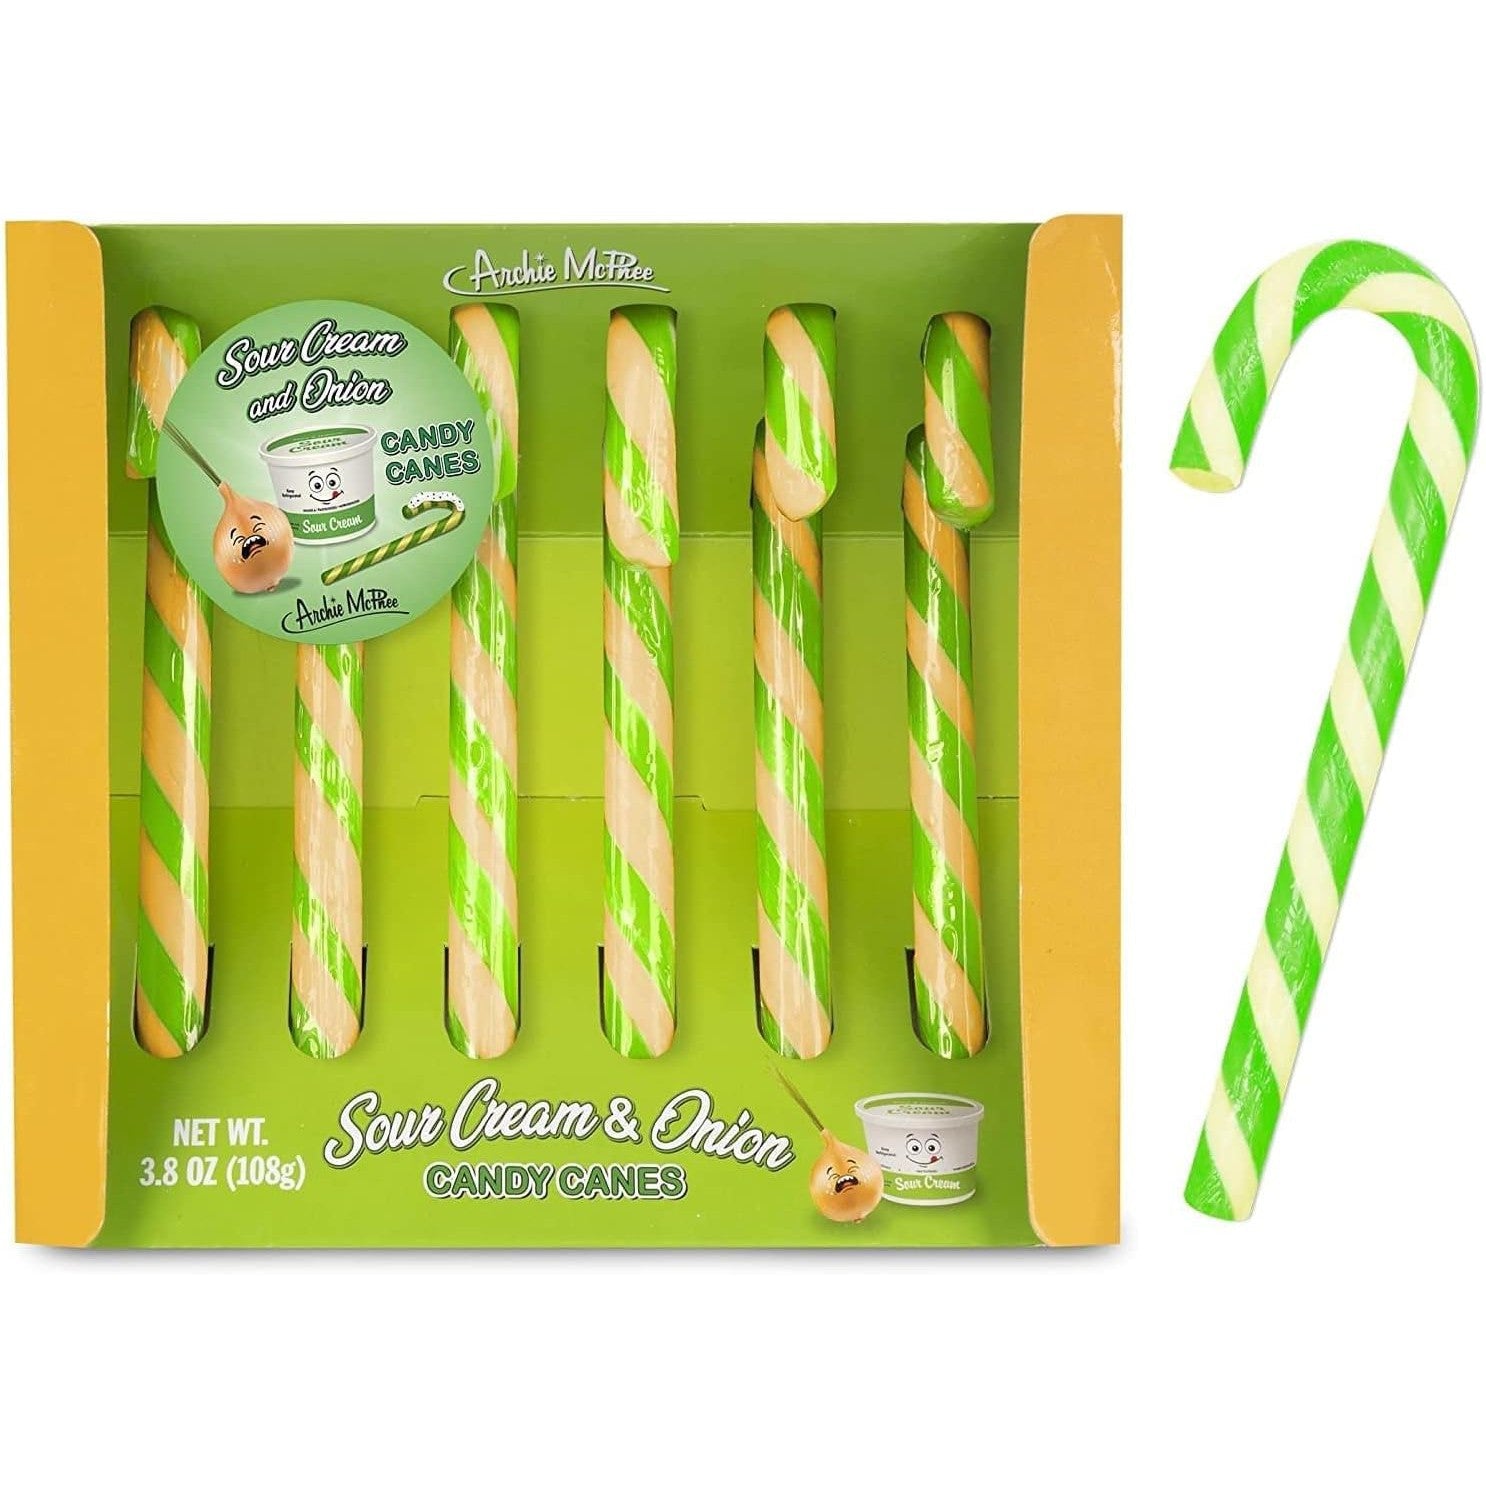 Sour Cream and Onion Candy Canes | Gift Box of 6 Funny Candy Canes